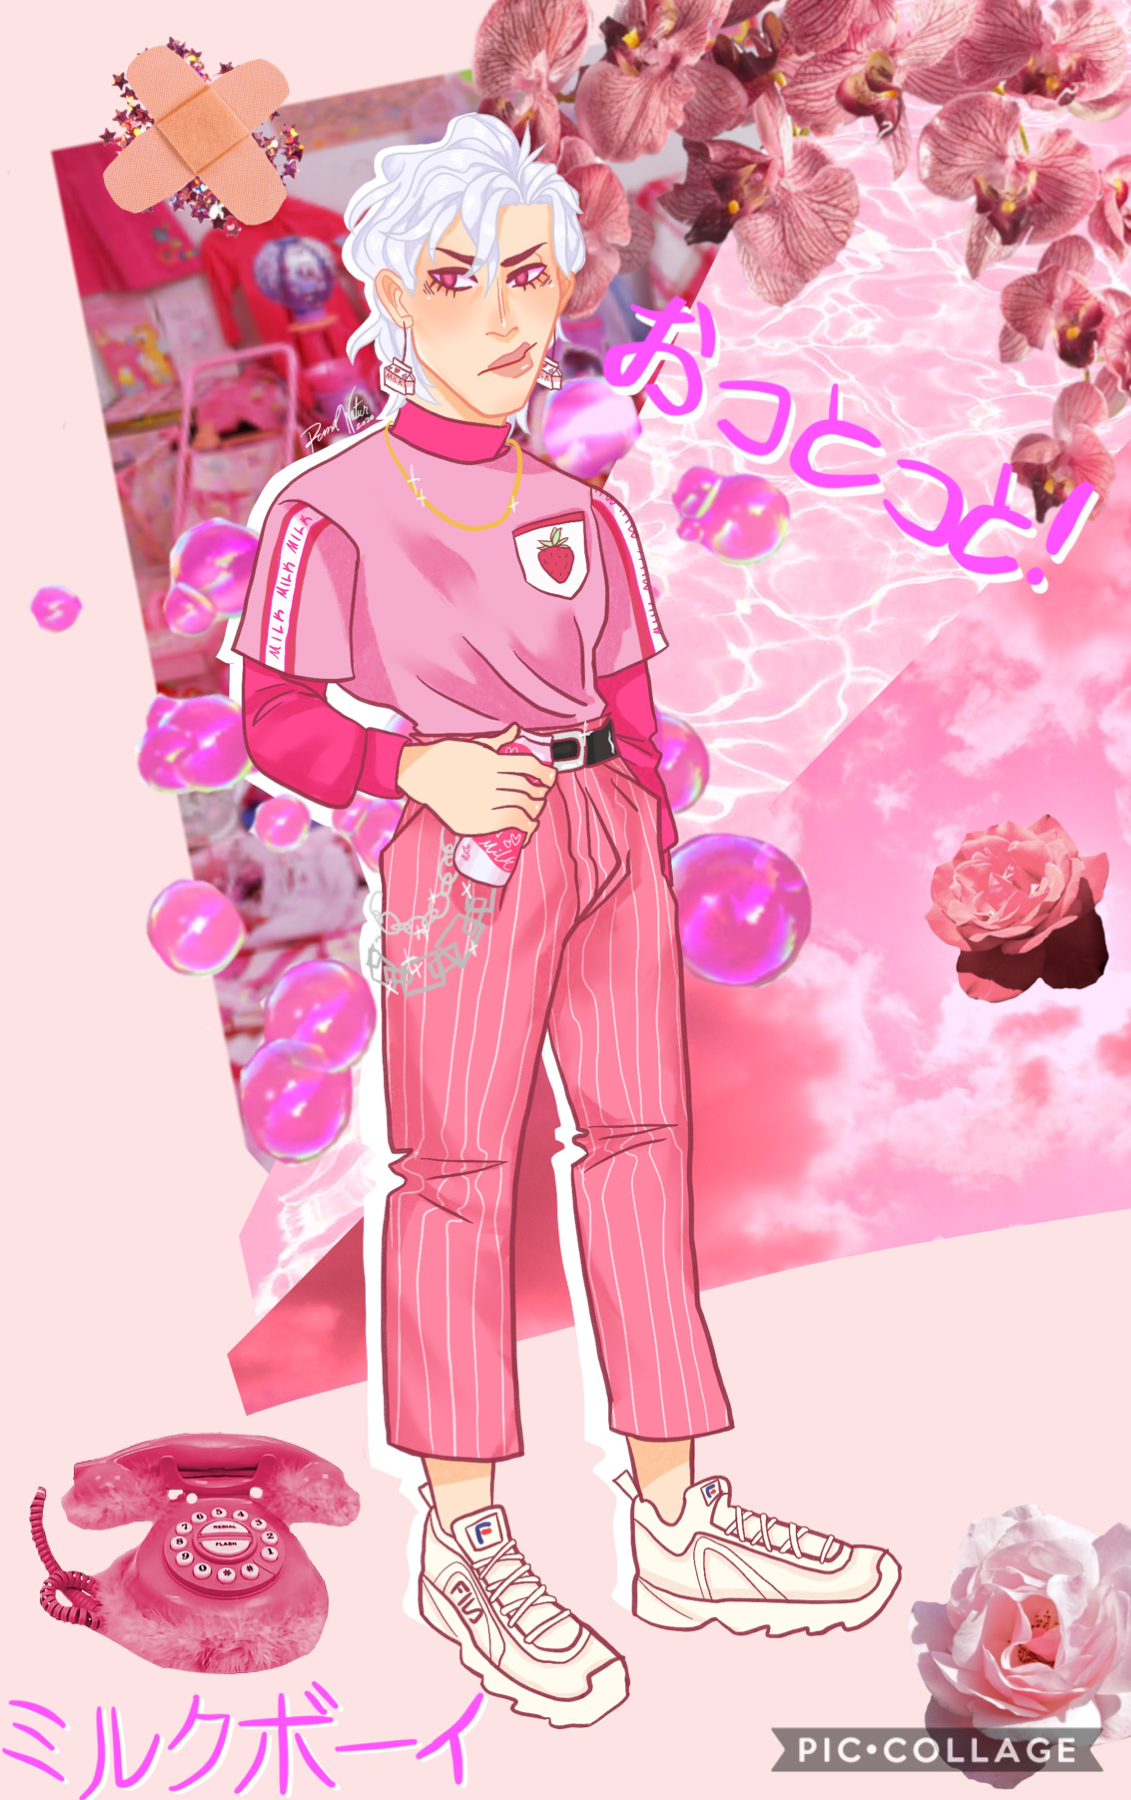 wth cute little pink fugo ??😳😳🌸💖💘🌸💘🌸💝🌸💞💘 slightly different version in remixes 